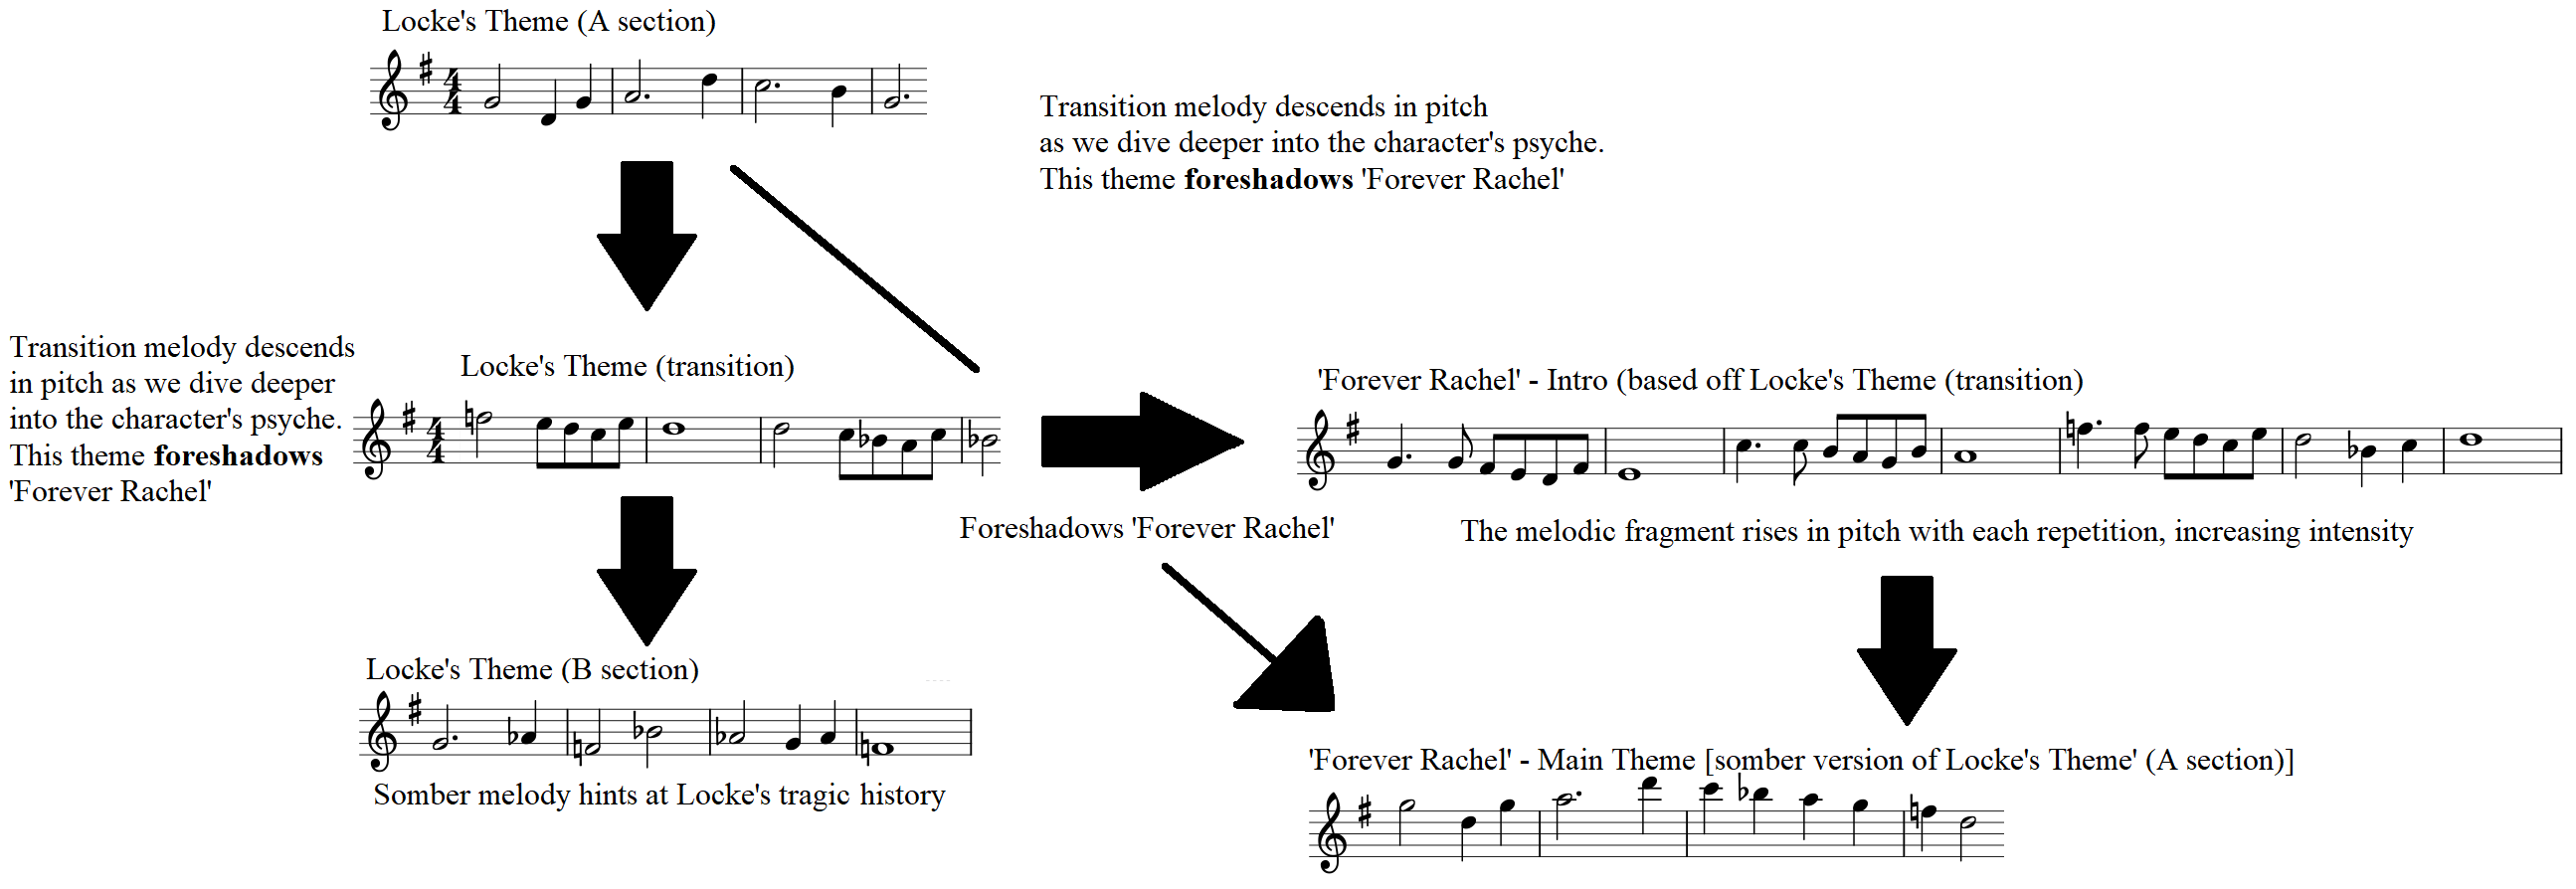 Diagram showing the musical anatomy of "Lockes Theme" 